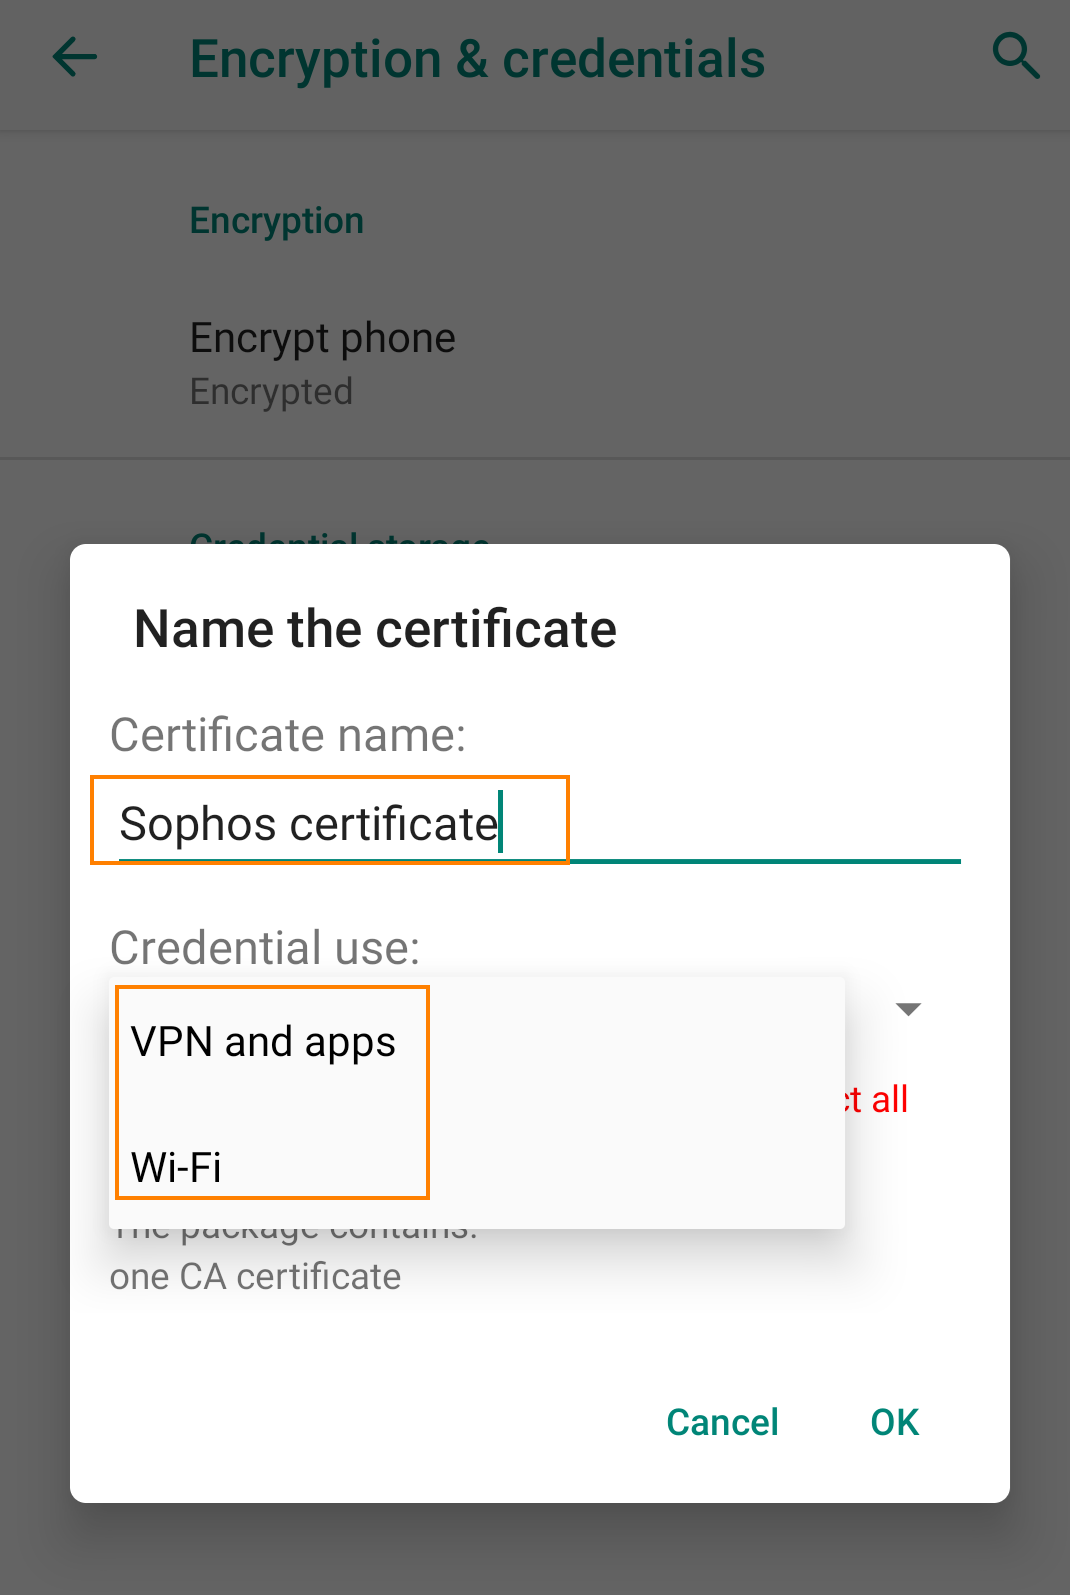 Enter the certificate name